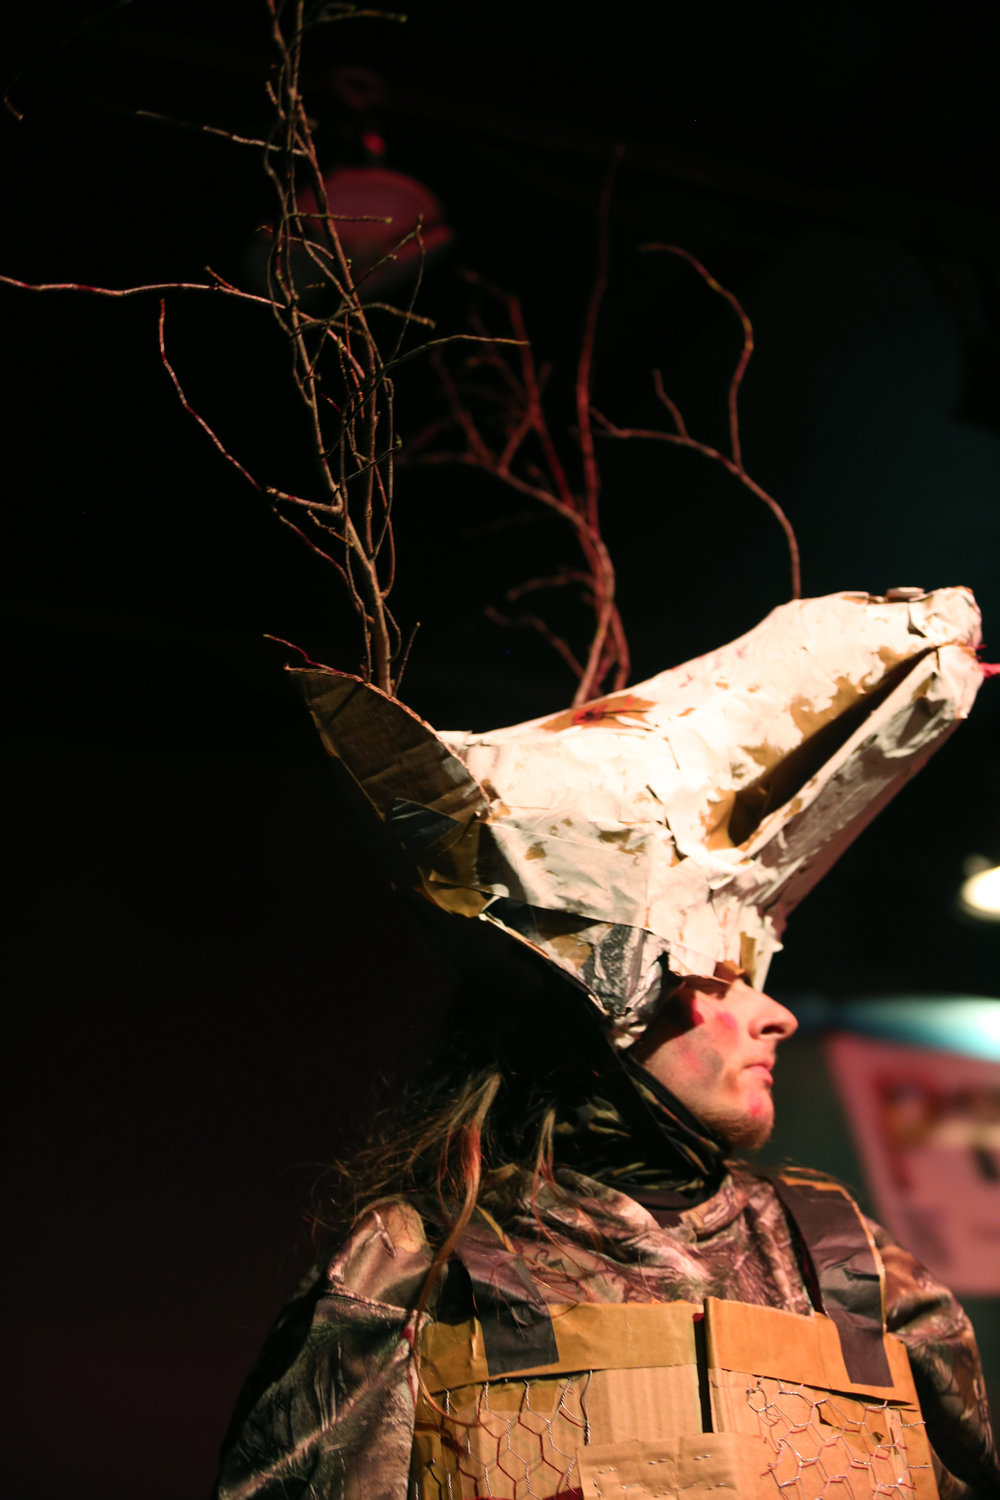 Winning “Best in Show,” Quilcene senior Jeremiah Satterrlee’s headpiece had the judges’ heads spinning.